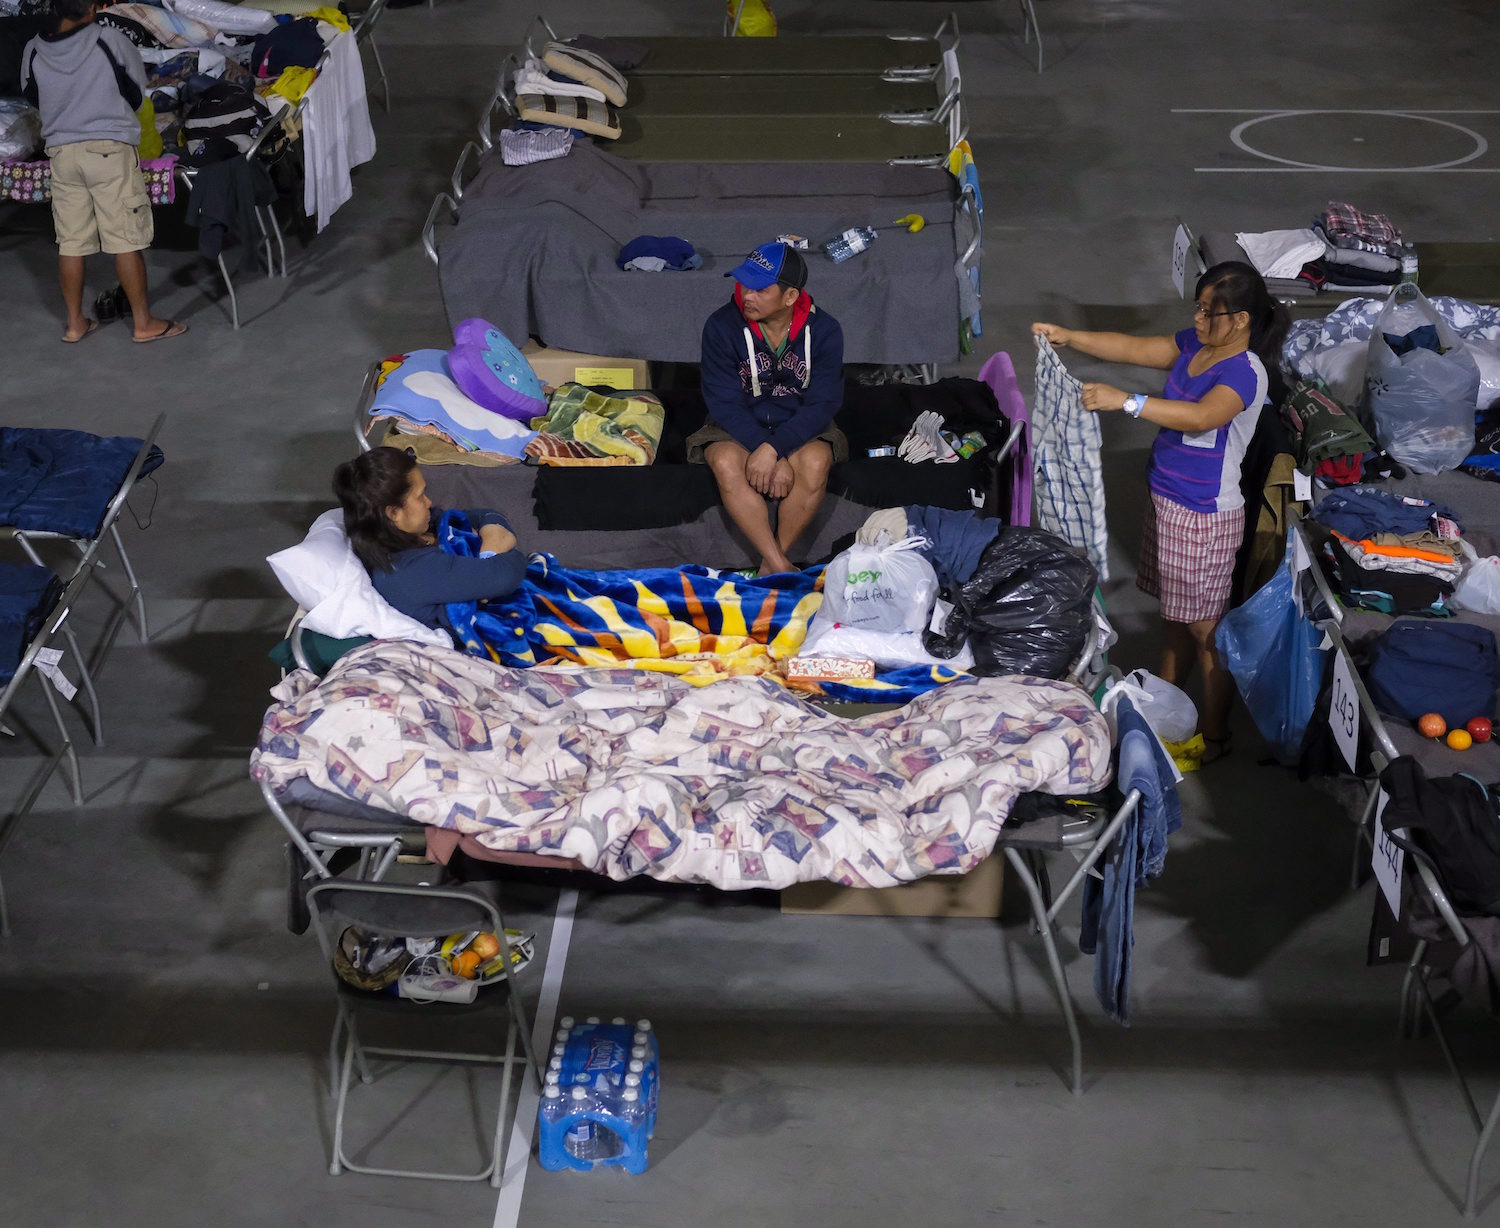 Evacuees from the Fort McMurray wildfires rest at the evacuation center in Lac la Biche, Alberta, Thursday, May 5, 2016. The Alberta government declared a province-wide fire ban in an effort to reduce the risk of more blazes in a province that is very hot and dry. The province of Alberta declared a state of emergency. (Jeff McIntosh/The Canadian Press via AP) MANDATORY CREDIT